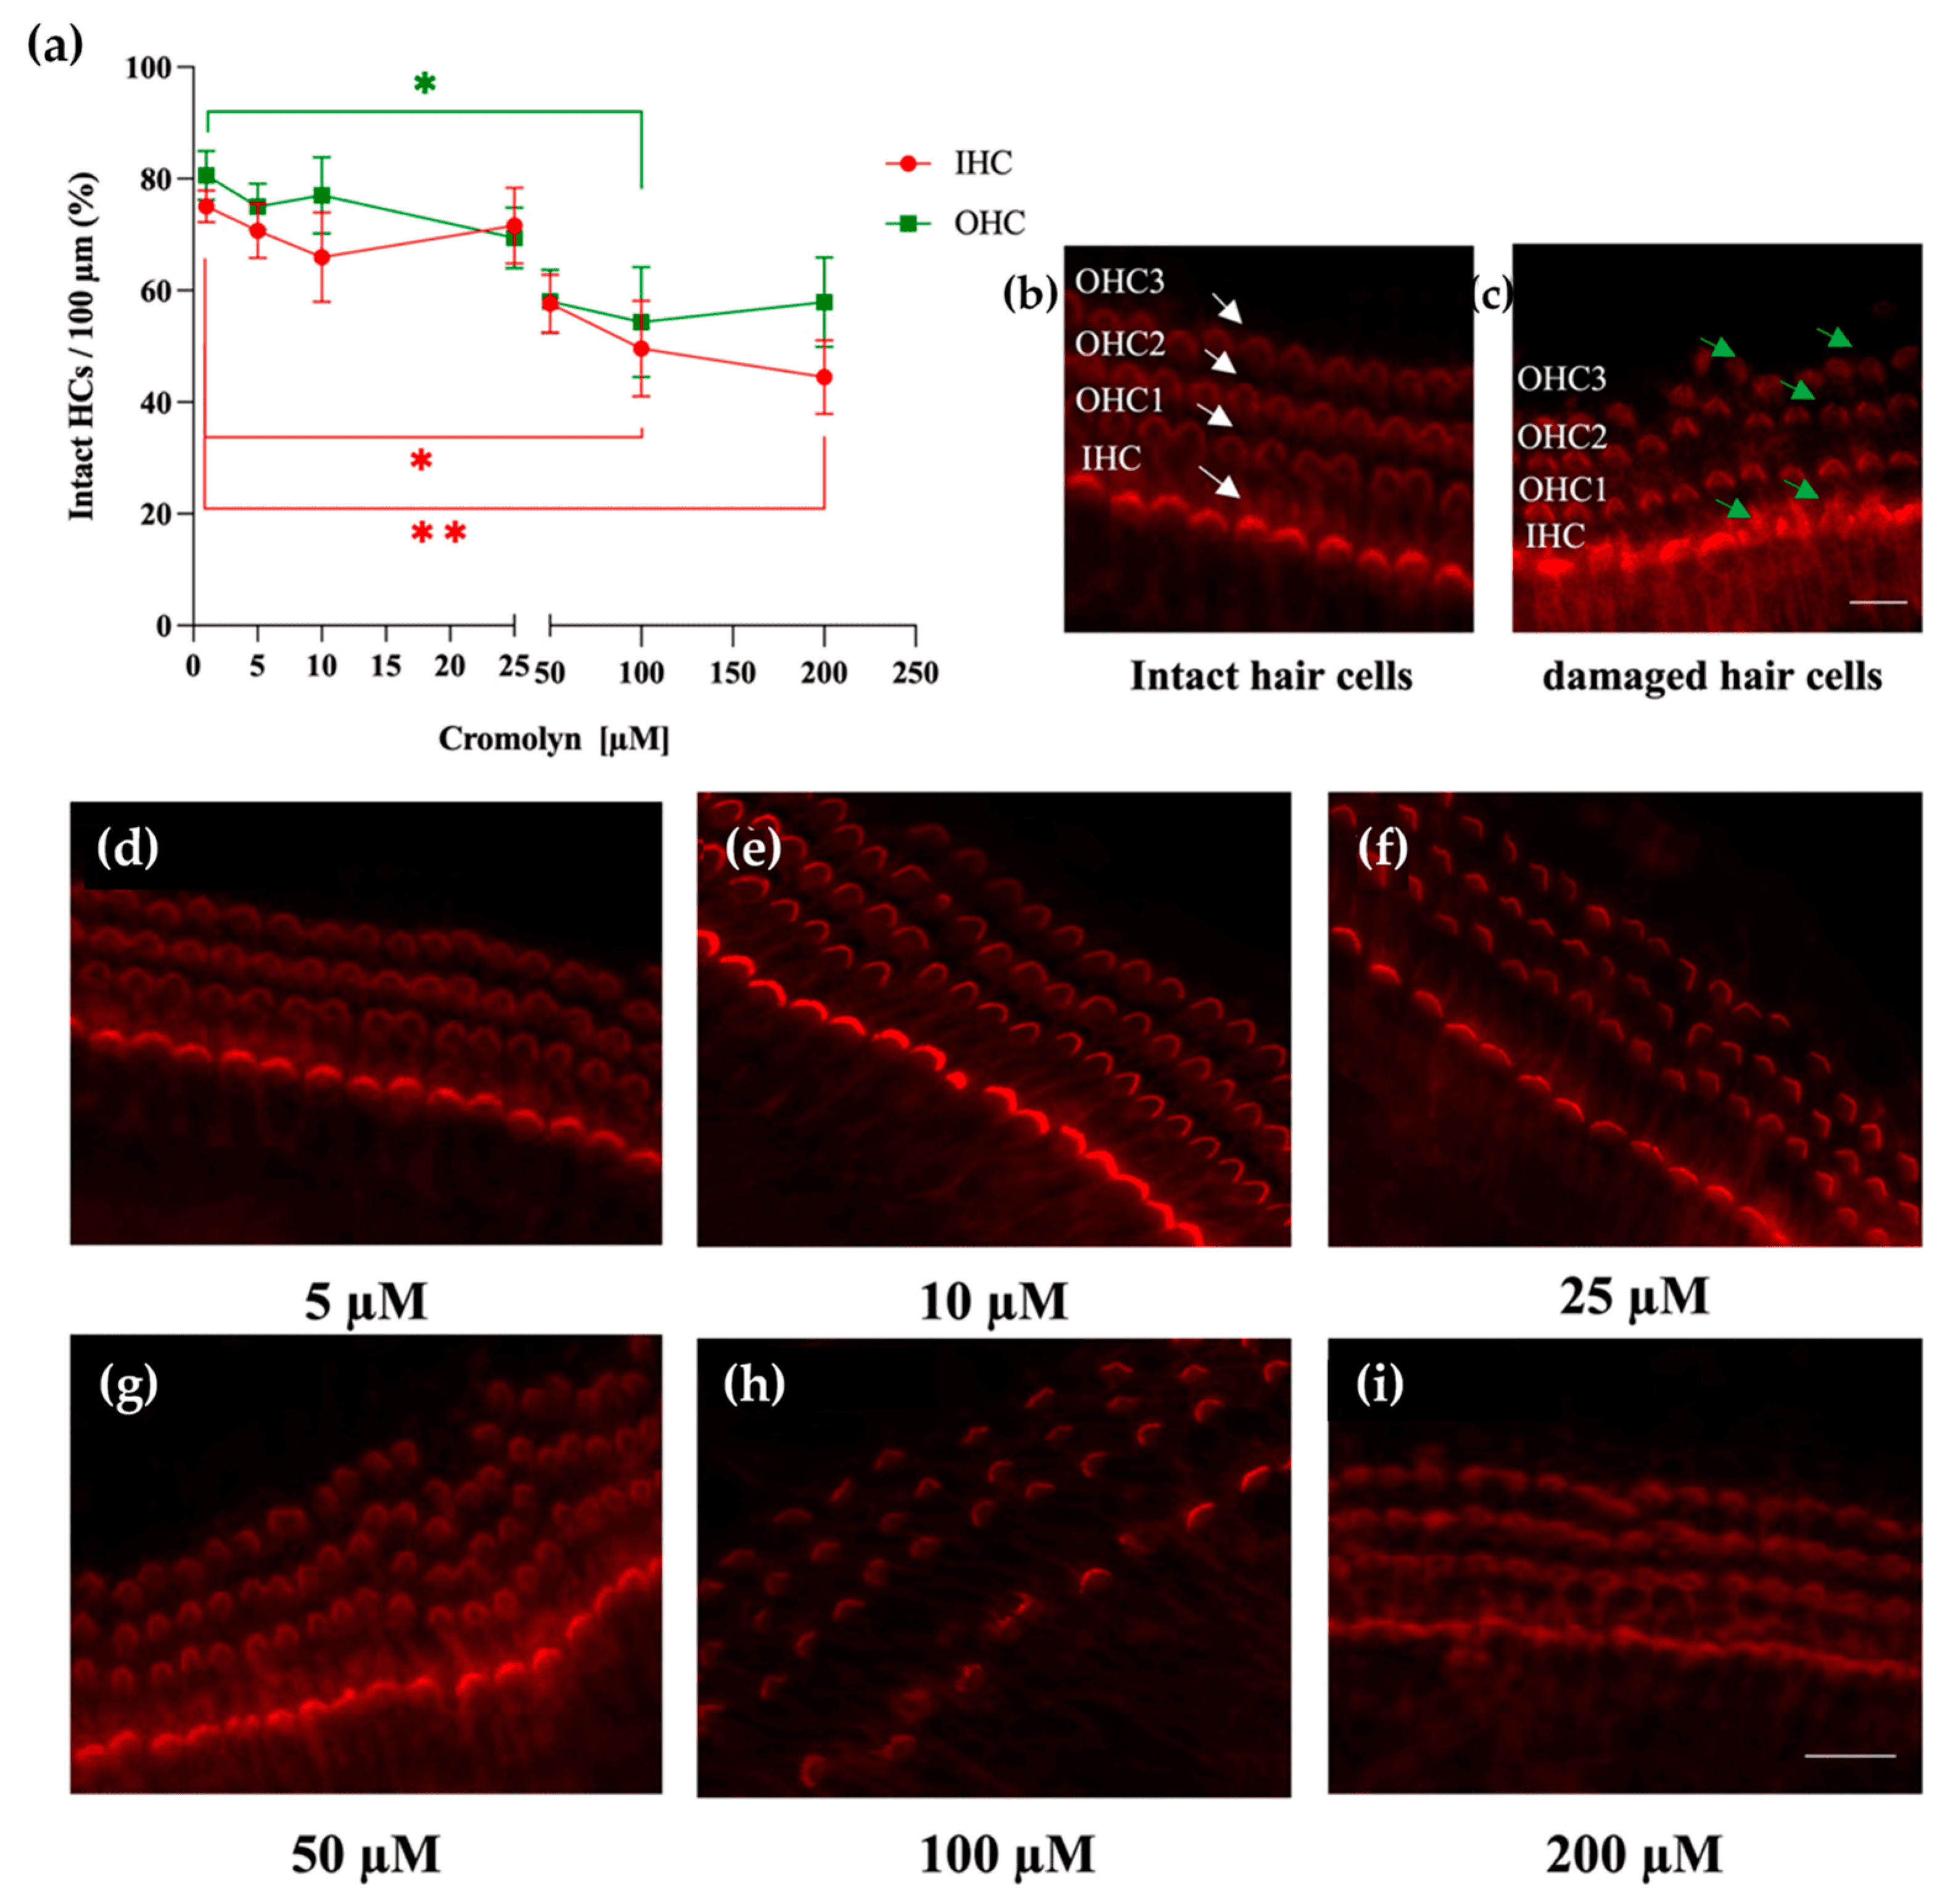 Cromolyn used at high concentrations decreases the numbers of IHCs and OHCs. (a) The intact hair cells were scored along the length of 100 µm of the cochlear explant (spiral limbus containing OC), and the percentages of intact IHCs (red circles) and OHCs (green squares) were determined and plotted on the y-axis. The control explants (n = 4) were cultured for 24 h in a tissue culture medium. The treatment groups (n = 4 for each treatment) were cultured for 24 h with cromolyn at the following concentrations: 5 µM, 10 µM, 25 µM, 50 µM, 100 µM, and 200 µM. (b,c) Representative micrograph showing intact (b) and damaged (c) hair cells. Arrows point out intact HCs (white) and damaged HCs (green). Scale bar represents 10 µM. (d–i) Representative micrograph showing the HCs after 24 h of exposure to 5 µM, 10 µM, 25 µM, 50 µM, 100 µM, and 200 µM cromolyn. The cochlea explants were stained with phalloidin-iFluor 594. The scale bar represents 10 µm. Four independent experiments were performed; the data are reported as mean ± SEM. * p < 0.05; ** p < 0.01 (two-way ANOVA with Dunnett multiple comparison test). Source: <b>Degranulation of Murine Resident Cochlear Mast Cells: A Possible Factor Contributing to Cisplatin-Induced Ototoxicity and Neurotoxicity</b> by Karayay <em>et.al.</em>, <em>Int. J. Mol. Sci.</em> Feb. 2023